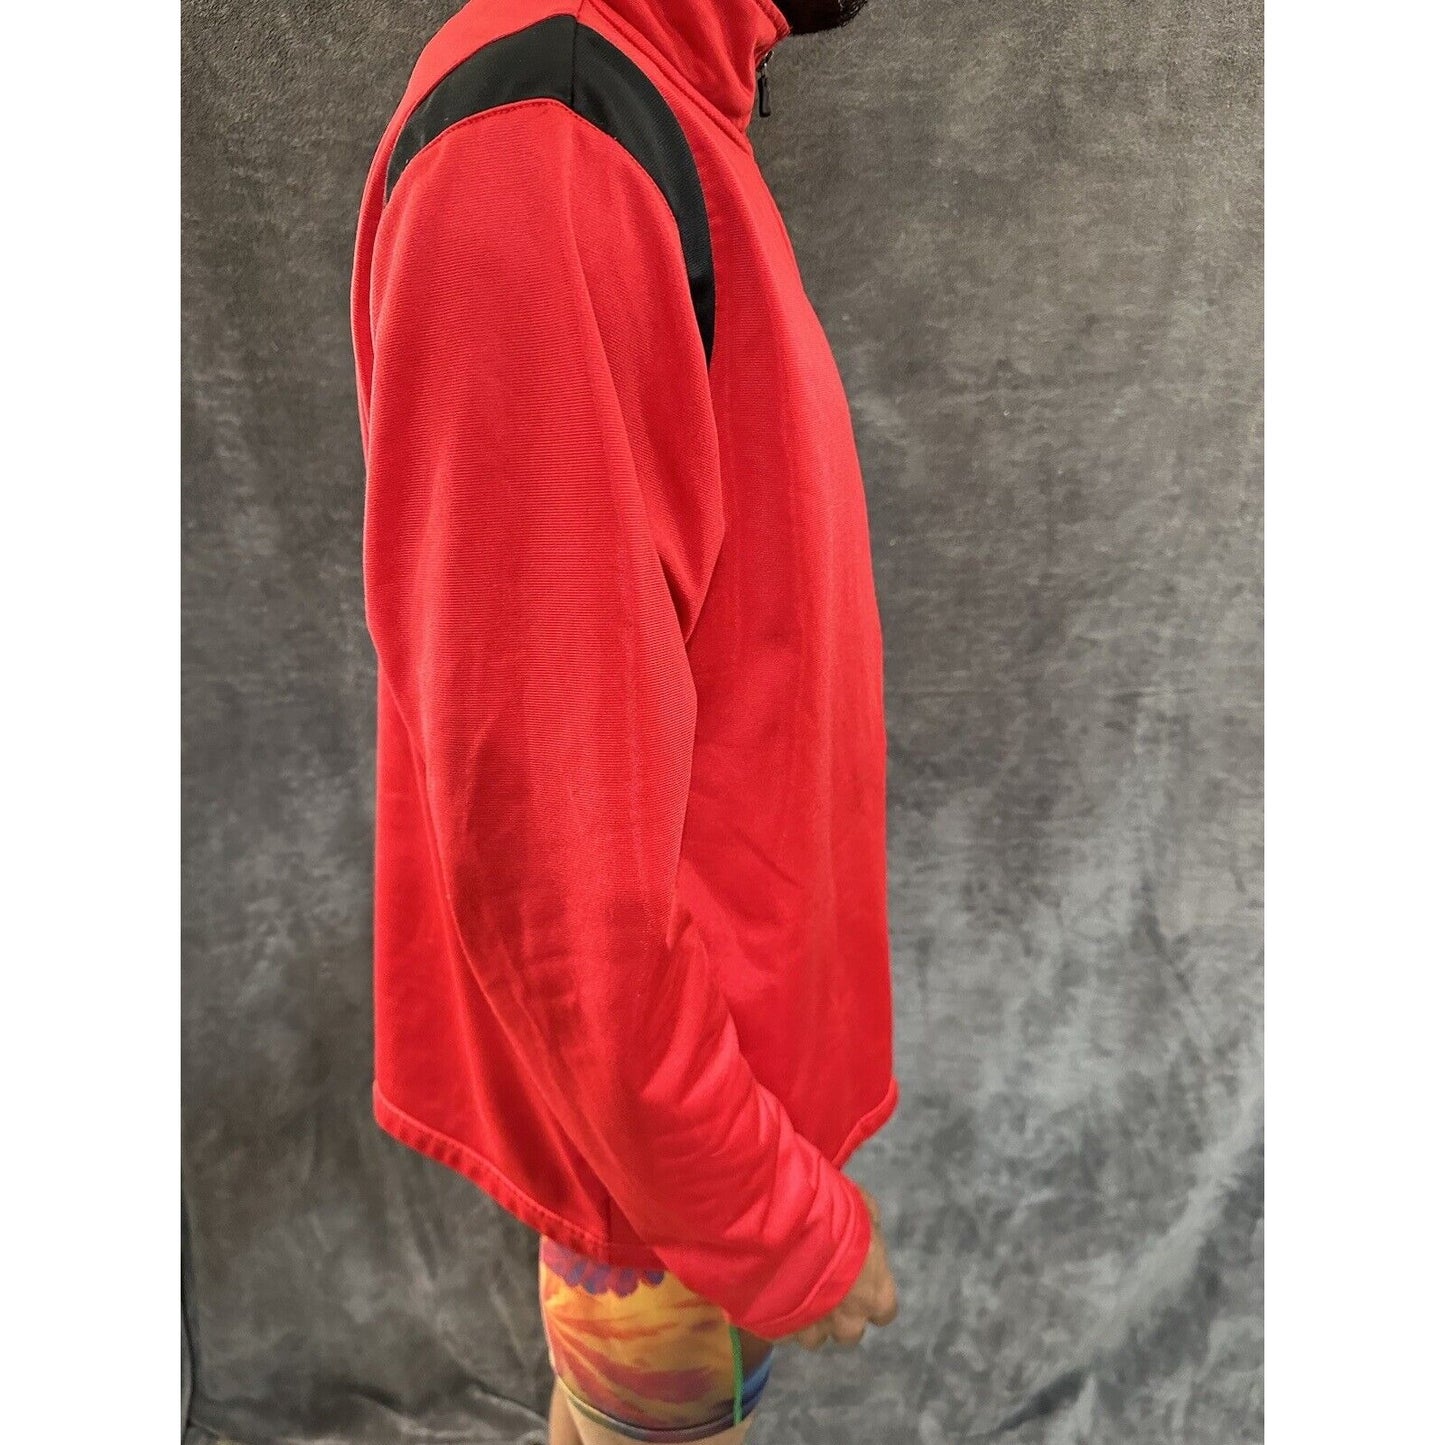 Men’s Red Full Zip AND1 Large Jacket